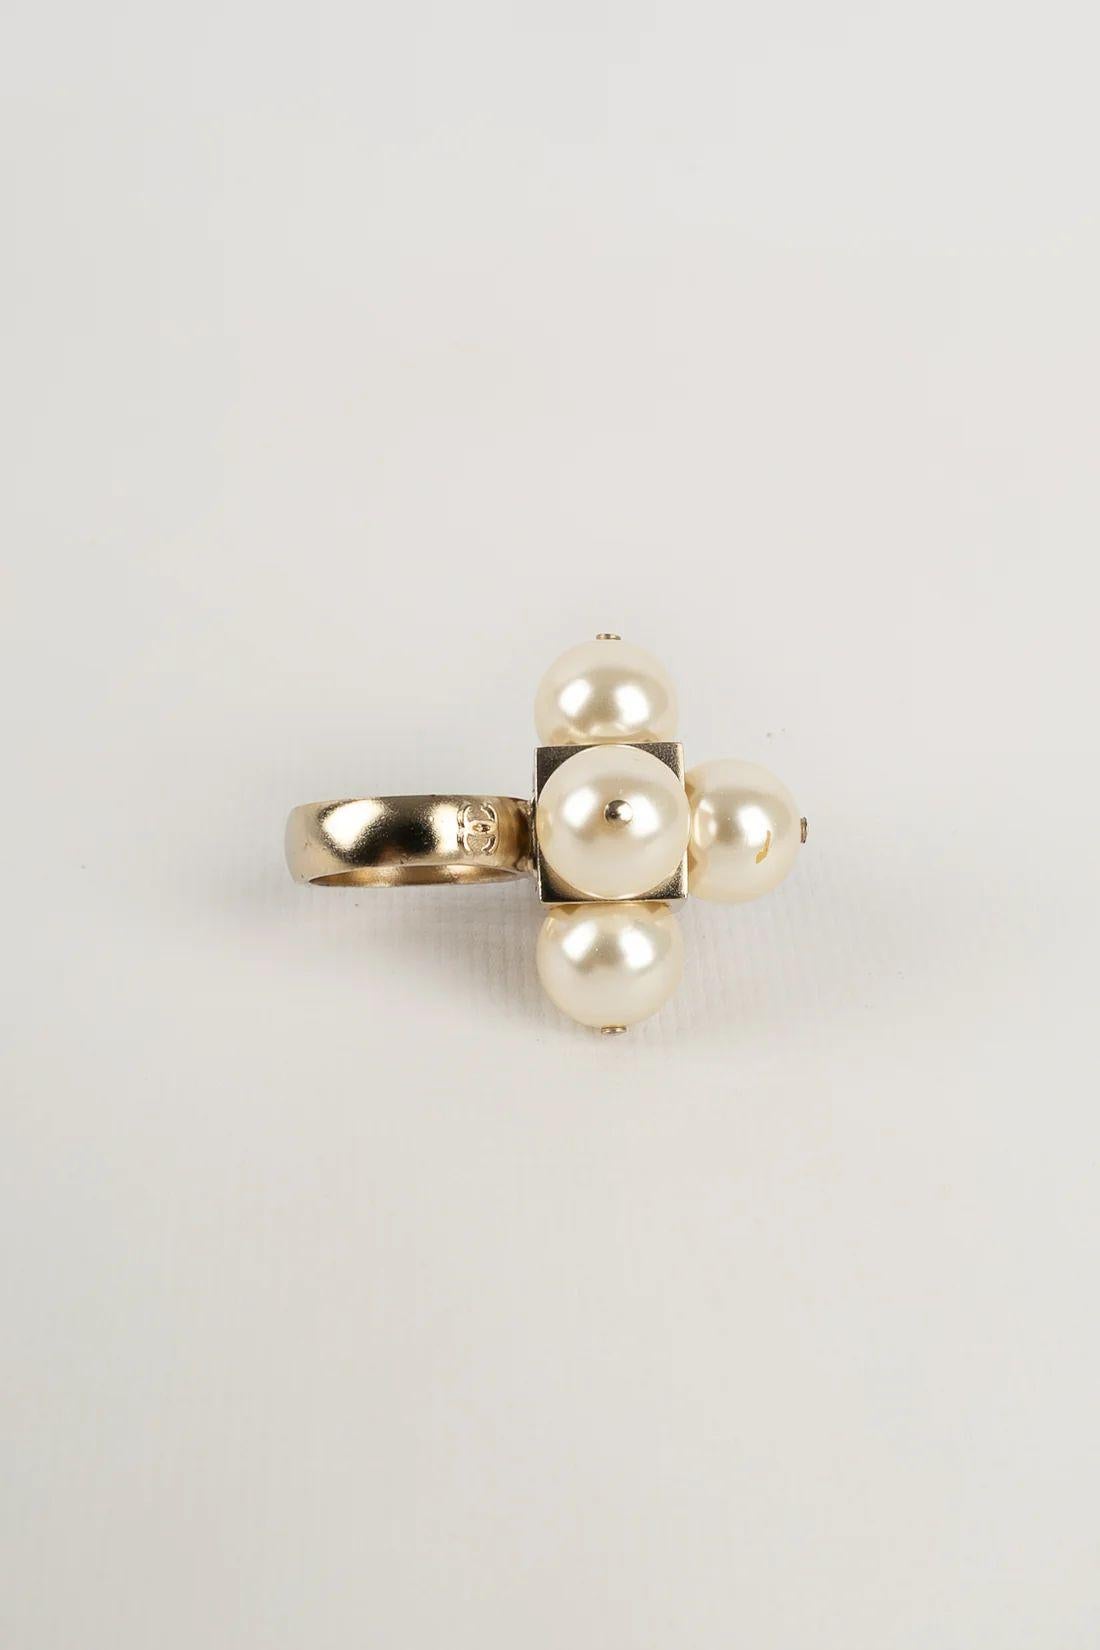 Artist Chanel Gold Metal and Pearl Ring, 2014 For Sale